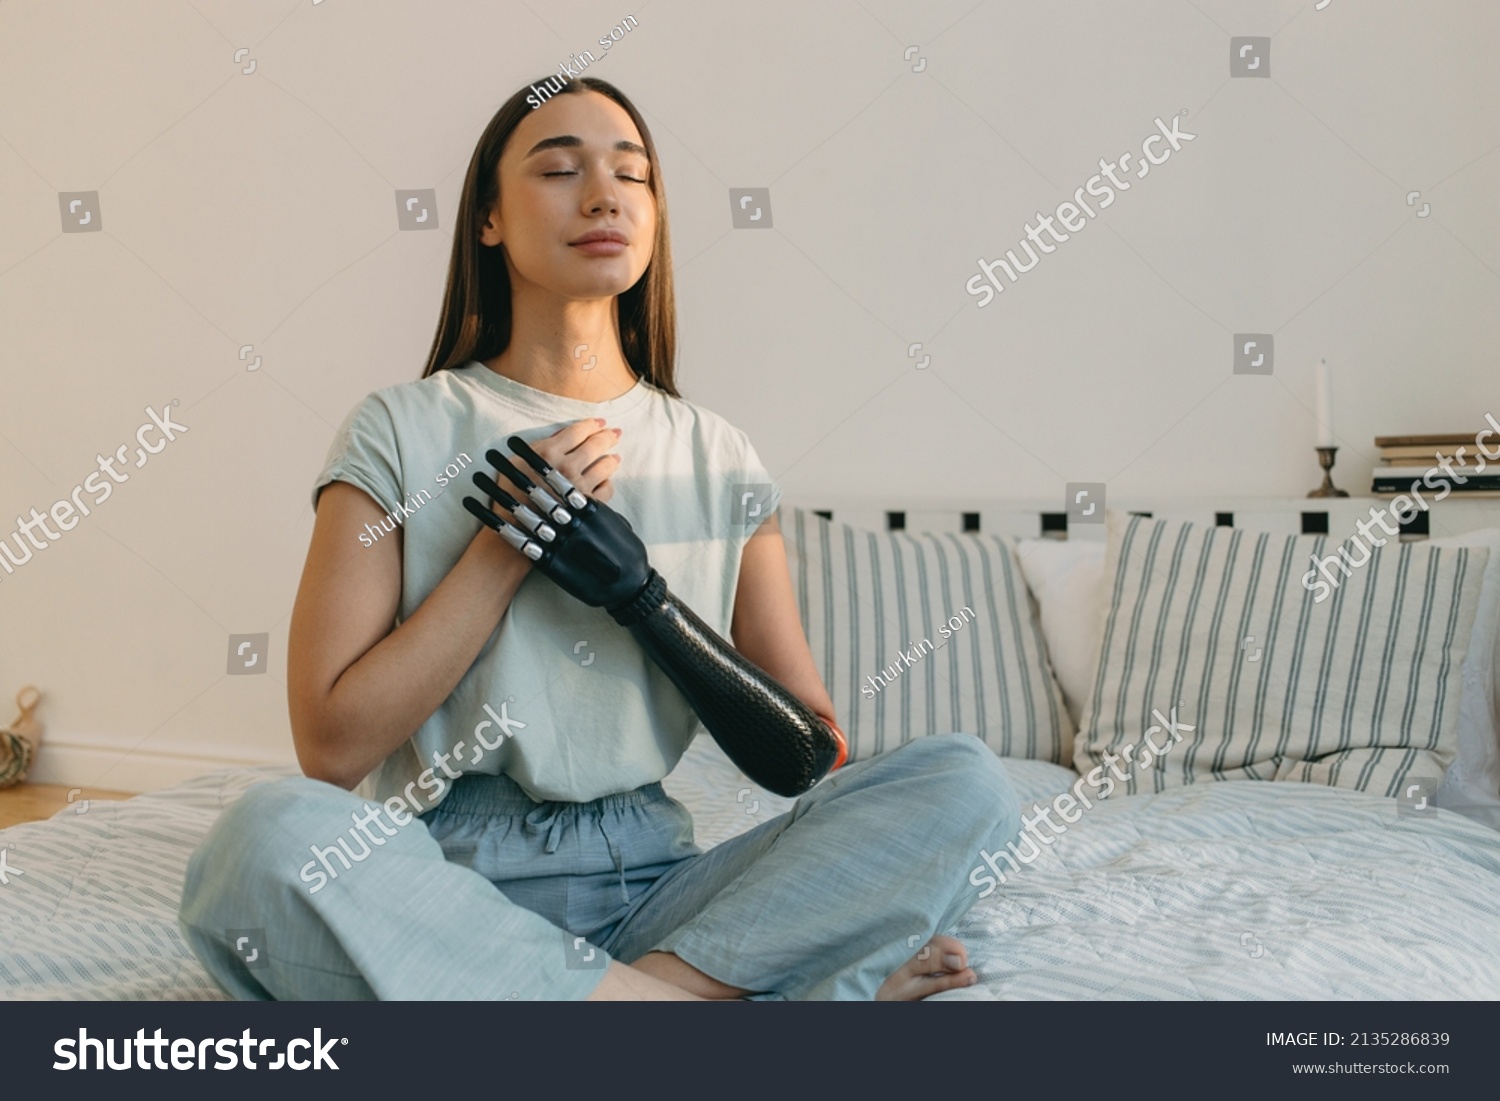 Young cyborg female practicing yoga in bed in early morning, meditating, keeping hands on chest, breathing, having bionic black prosthesis instead of left hand, wearing cute cotton pajama #2135286839